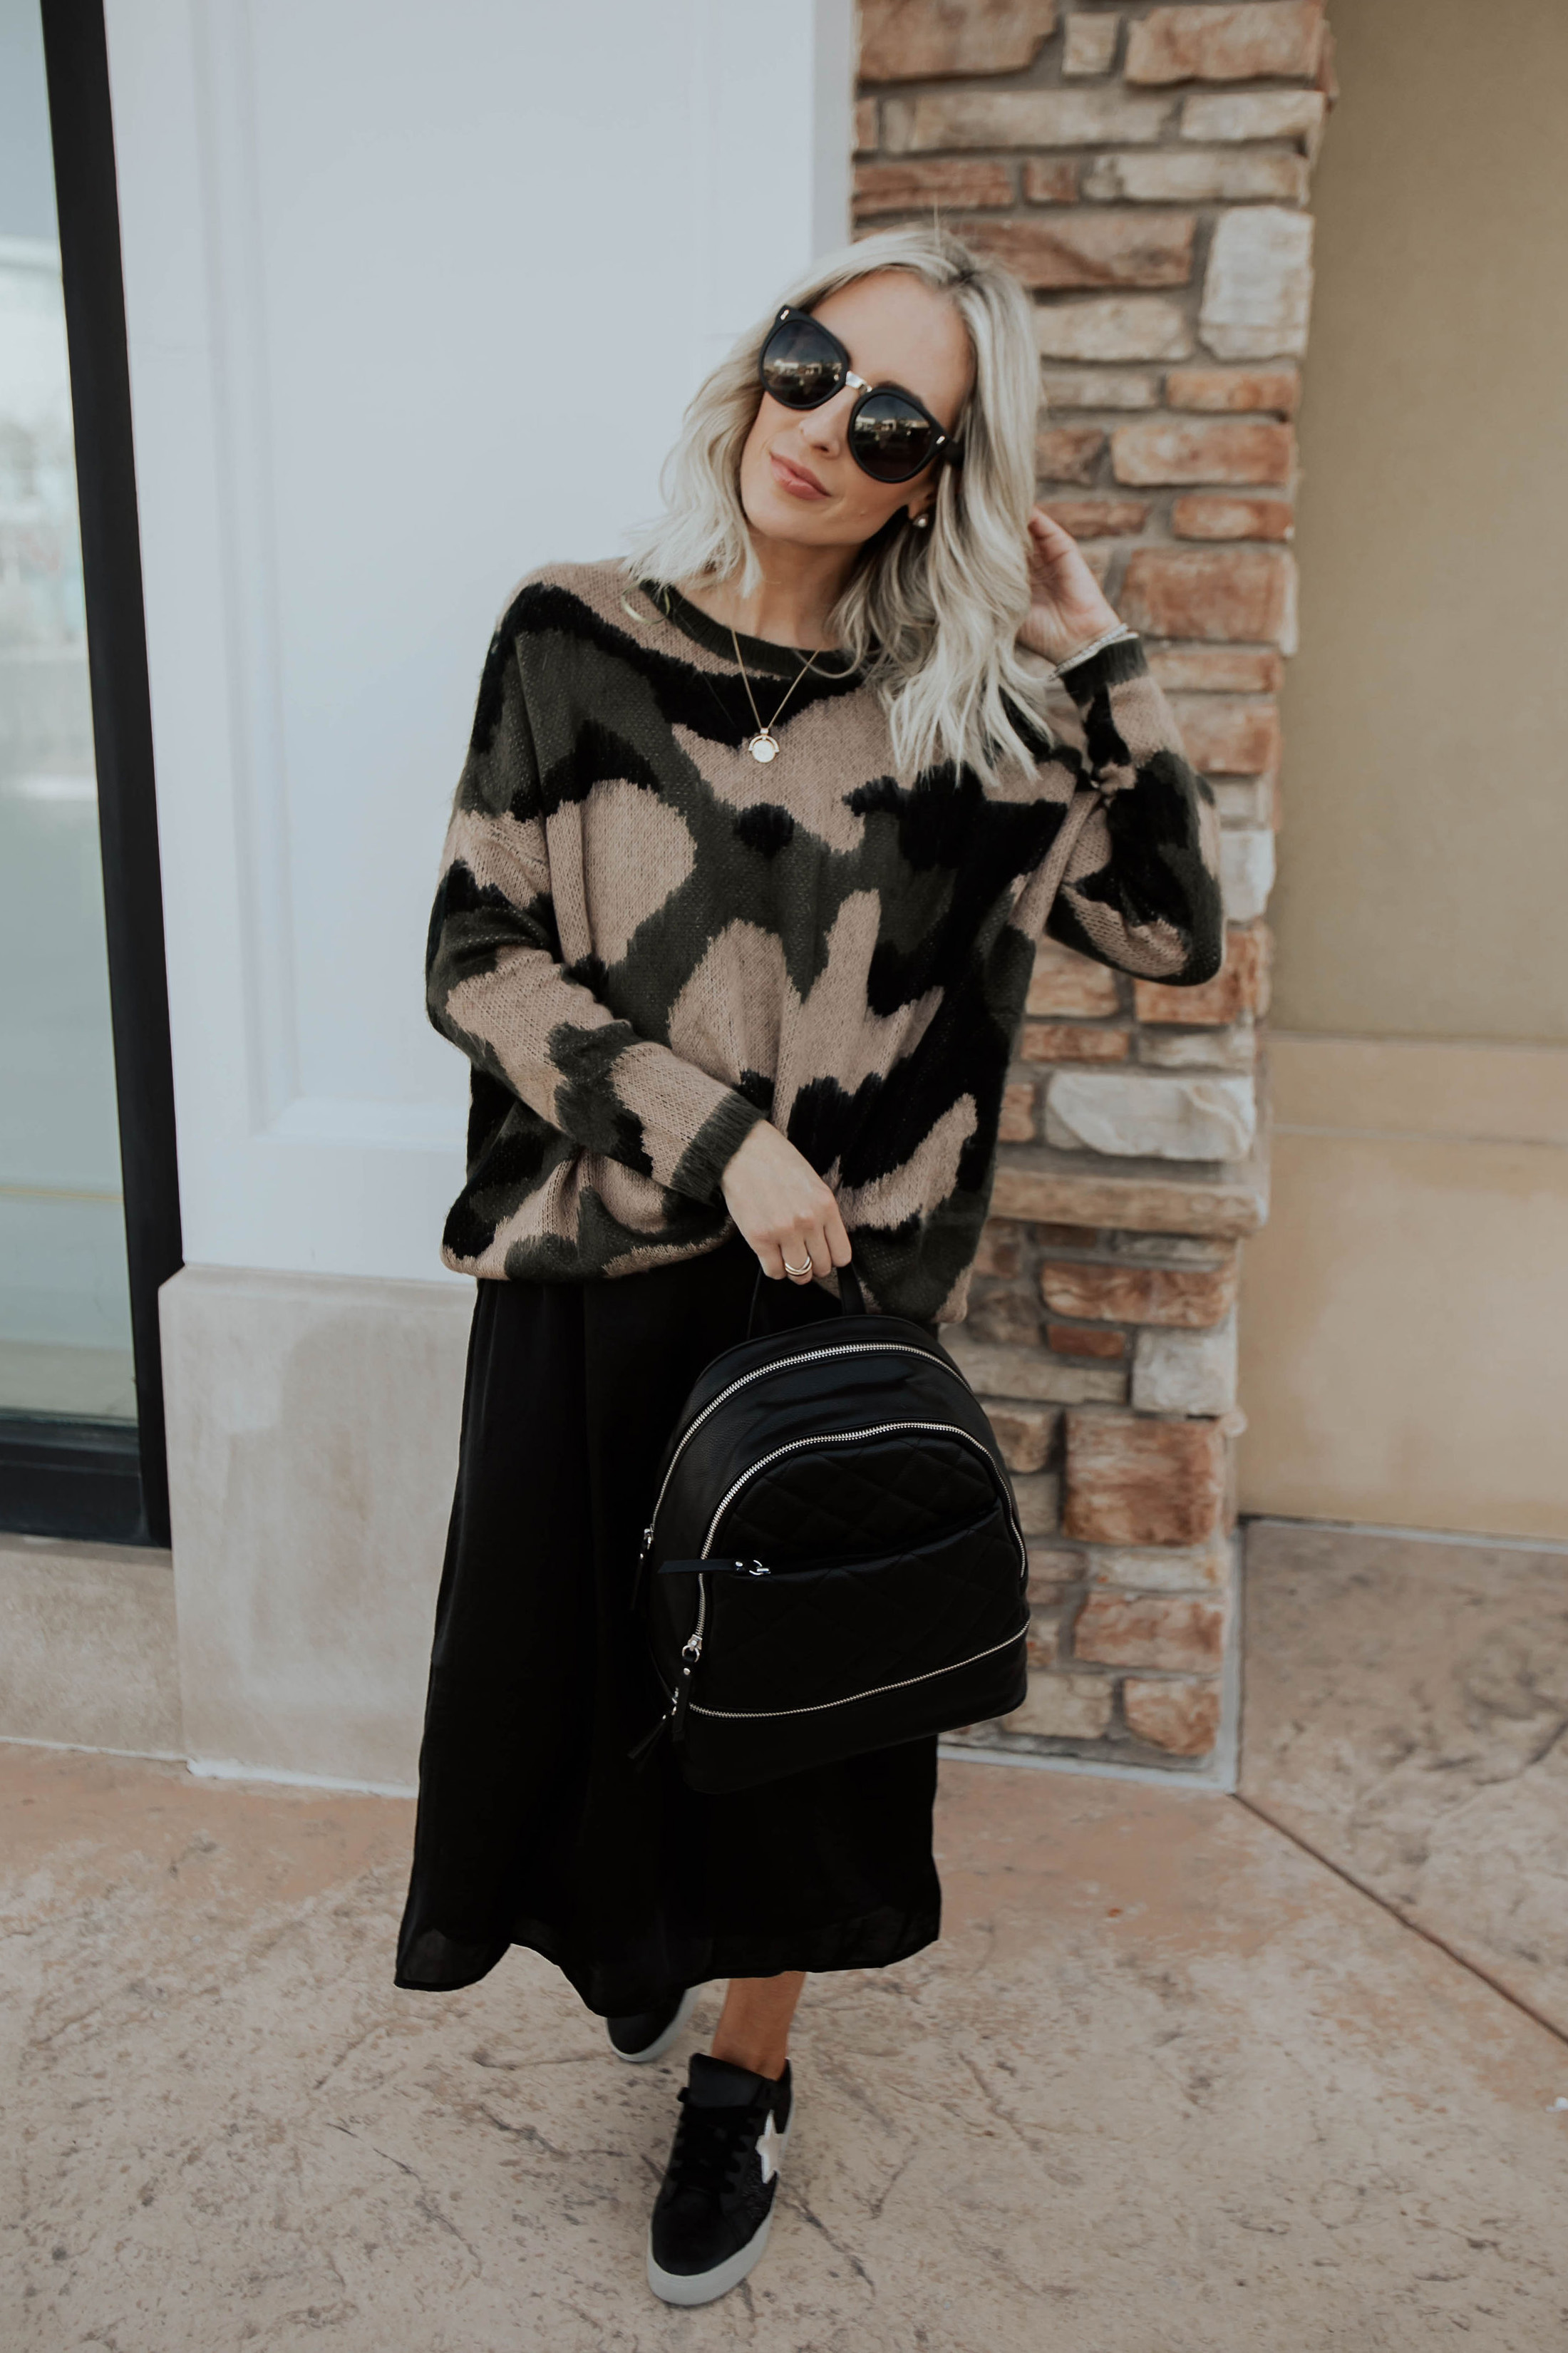 Reno Nevada Blogger, Emily Farren Wieczorek of Two Peas in a Prada shares all of her favorite fall fashion finds in her - Under $30 Fall Staples post with Walmart!